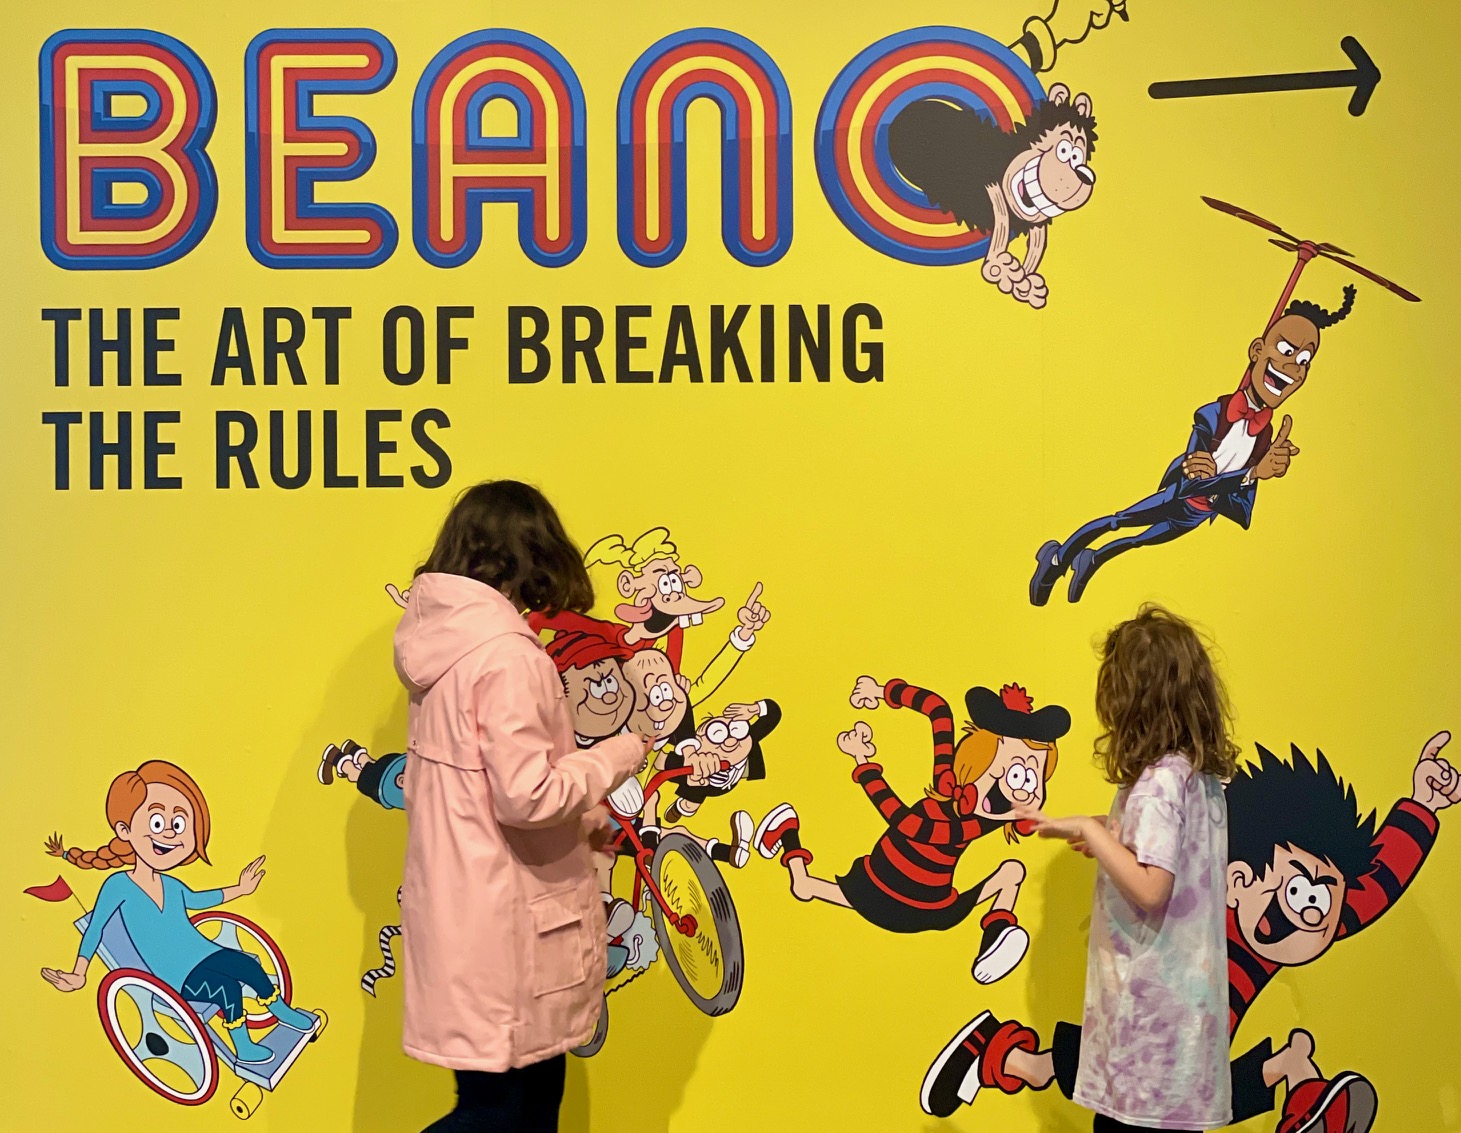 The Beano: The Art Of Breaking The Rules